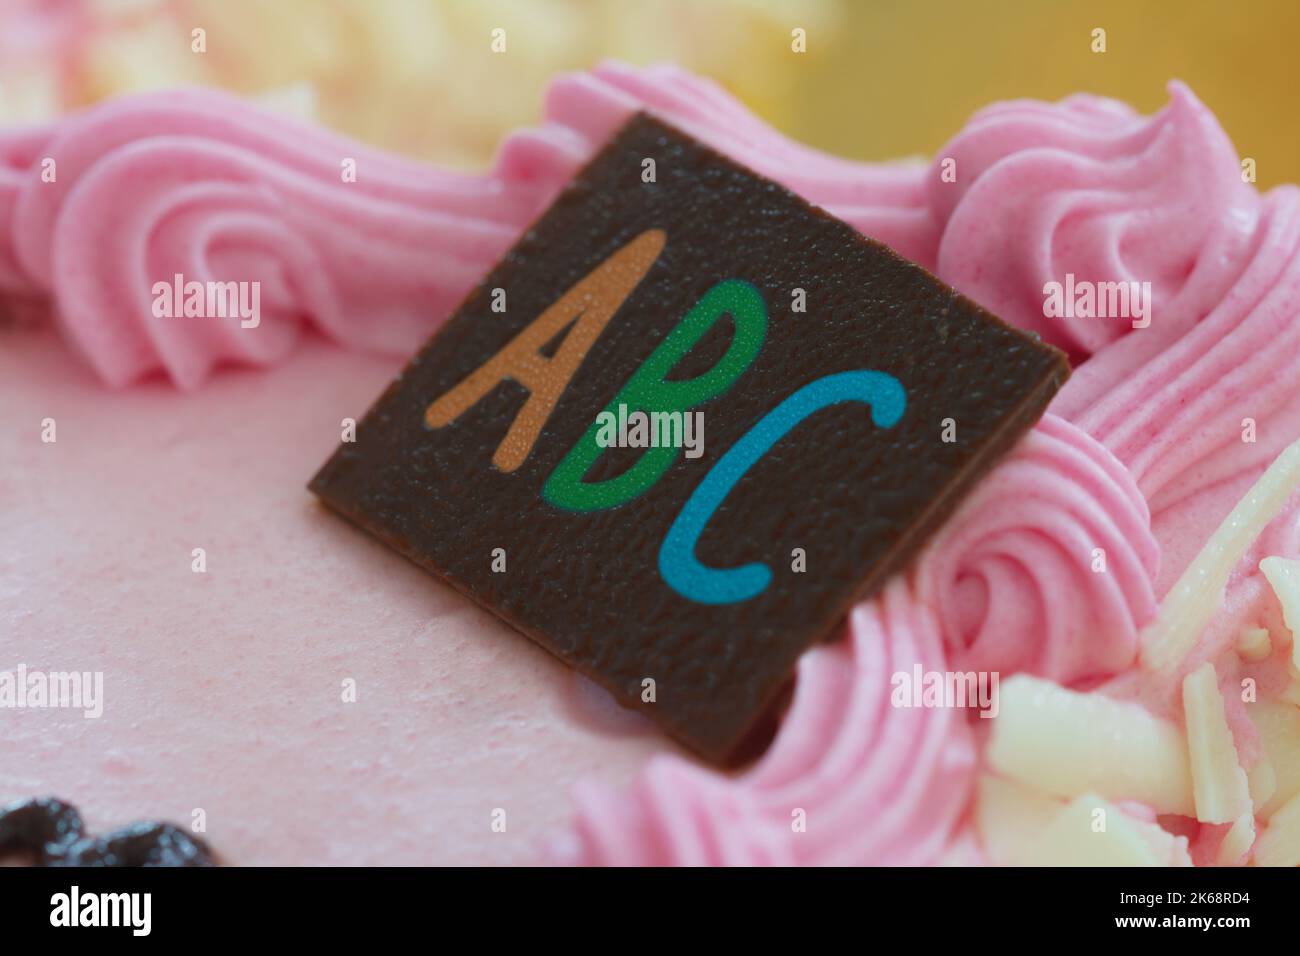 Close-up of cake with ABC sign Stock Photo